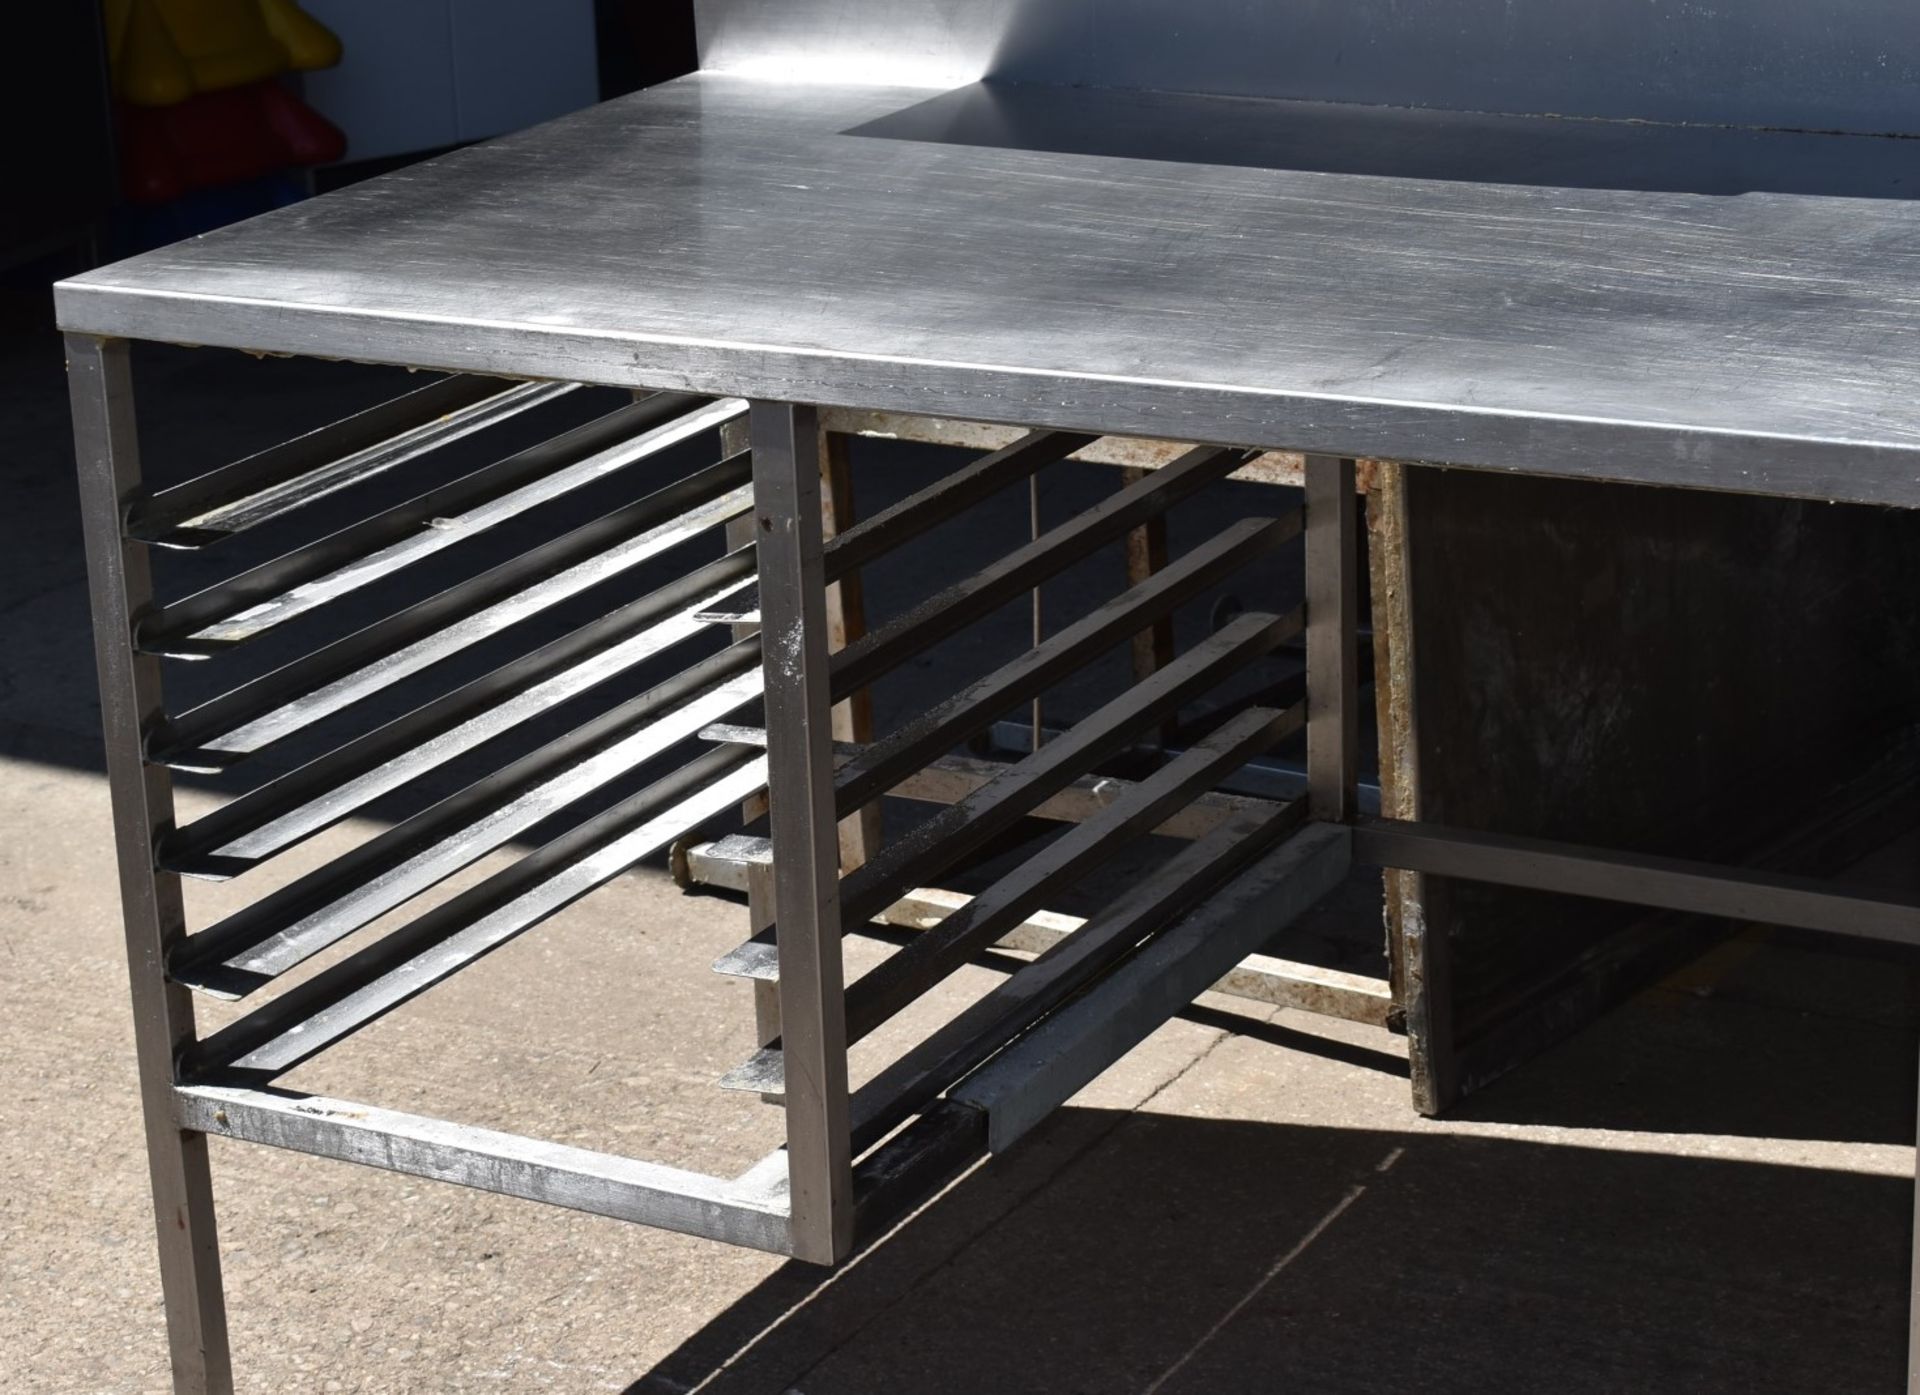 1 x Stainless Steel Prep Bench With Large Splashback Panel, Multiple Shelves and Tray Runners - Rece - Image 6 of 11